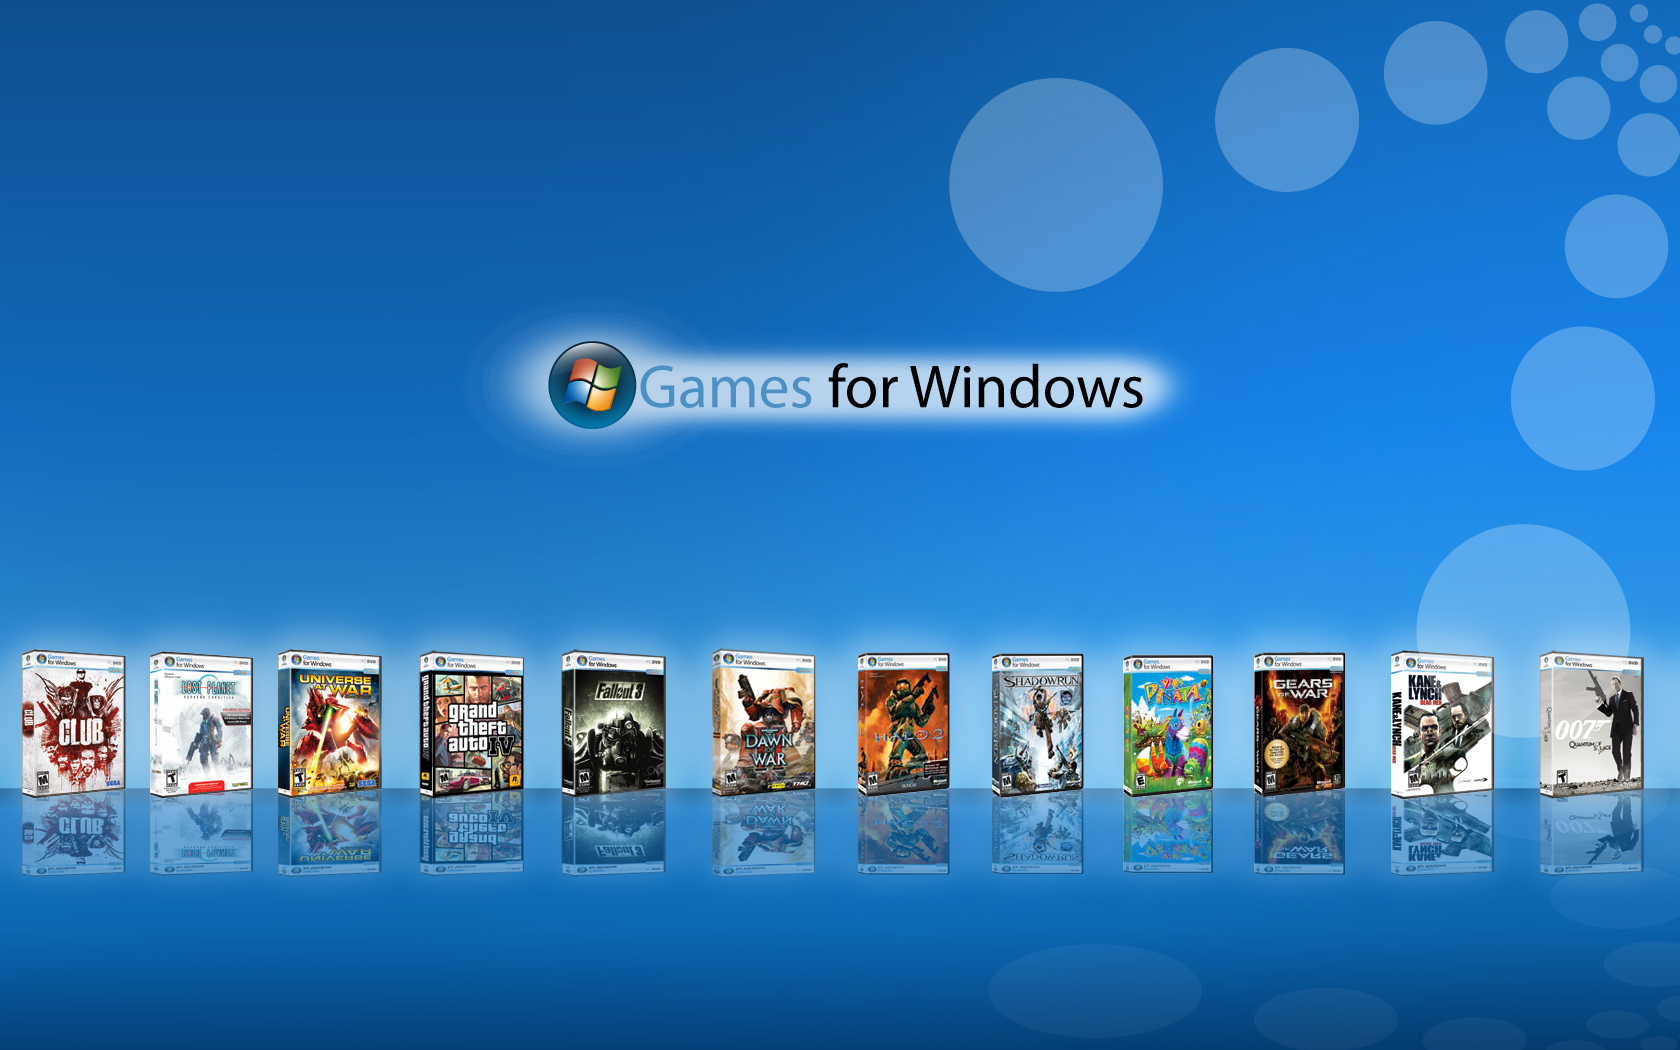 Games for Windows Wallpaper 3 by ~TheWax on deviantART